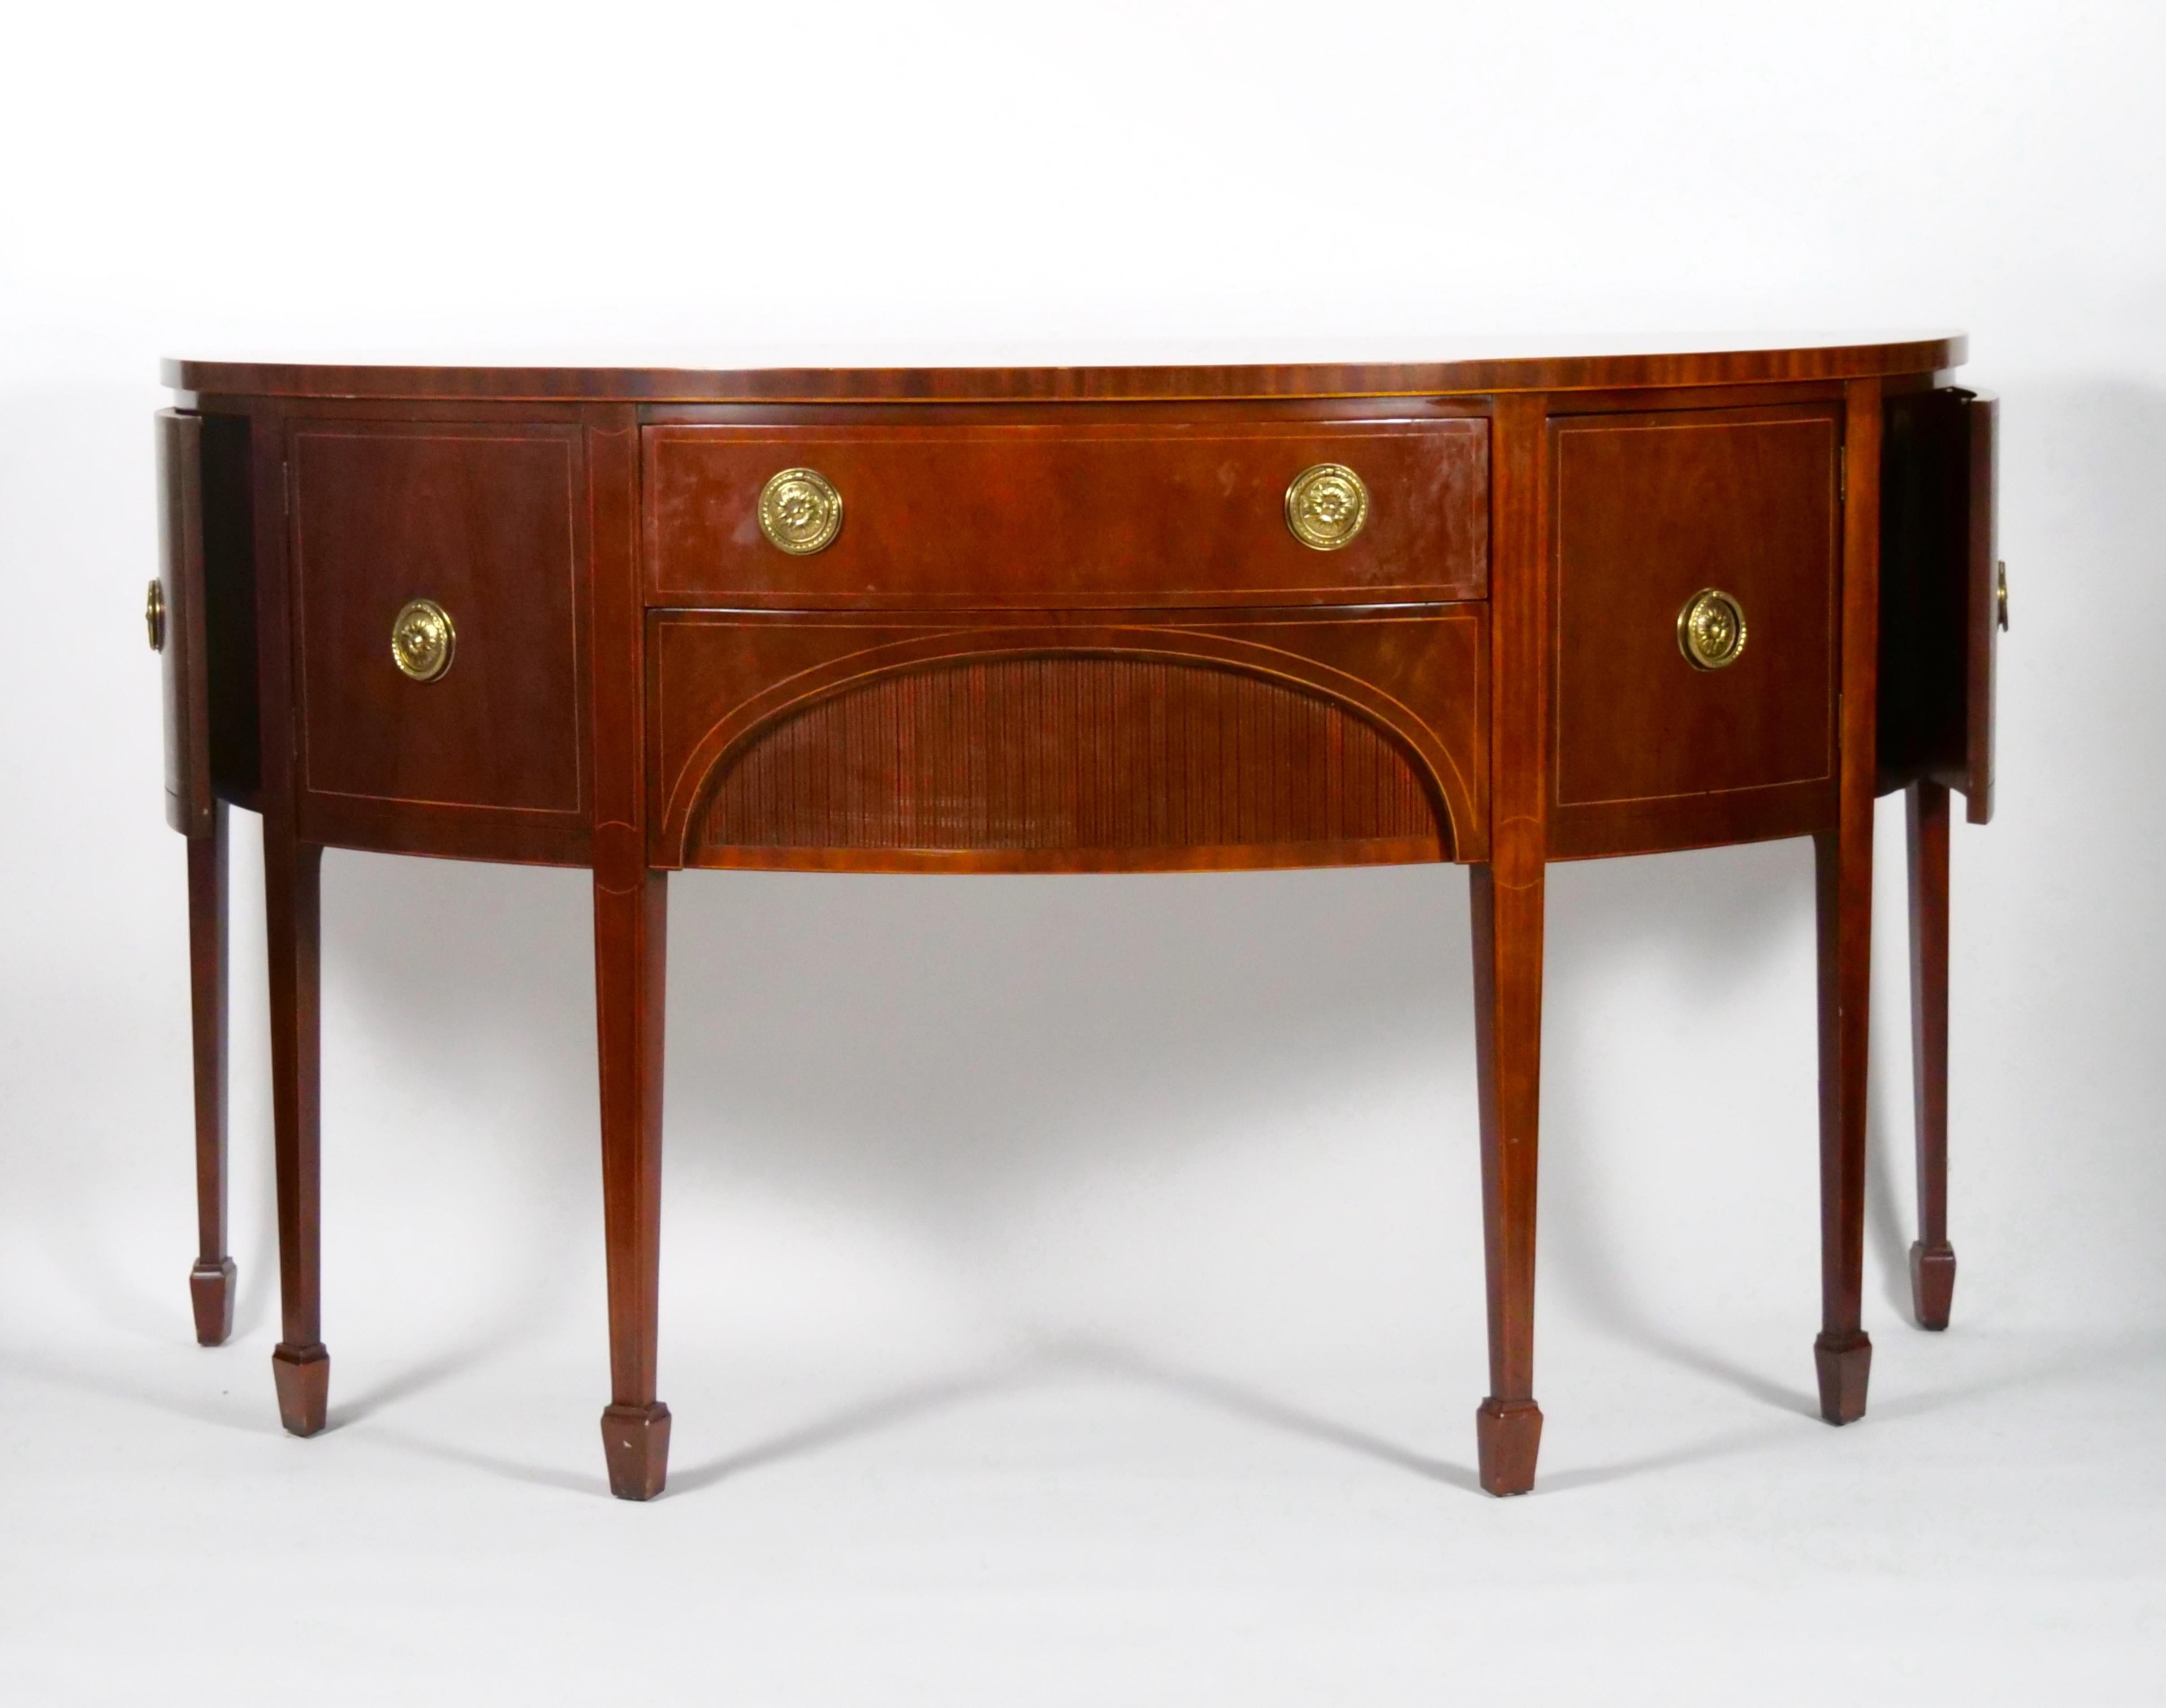 20th Century American Federal Style Mahogany Inlaid Decorated Credenzas / Sideboard For Sale